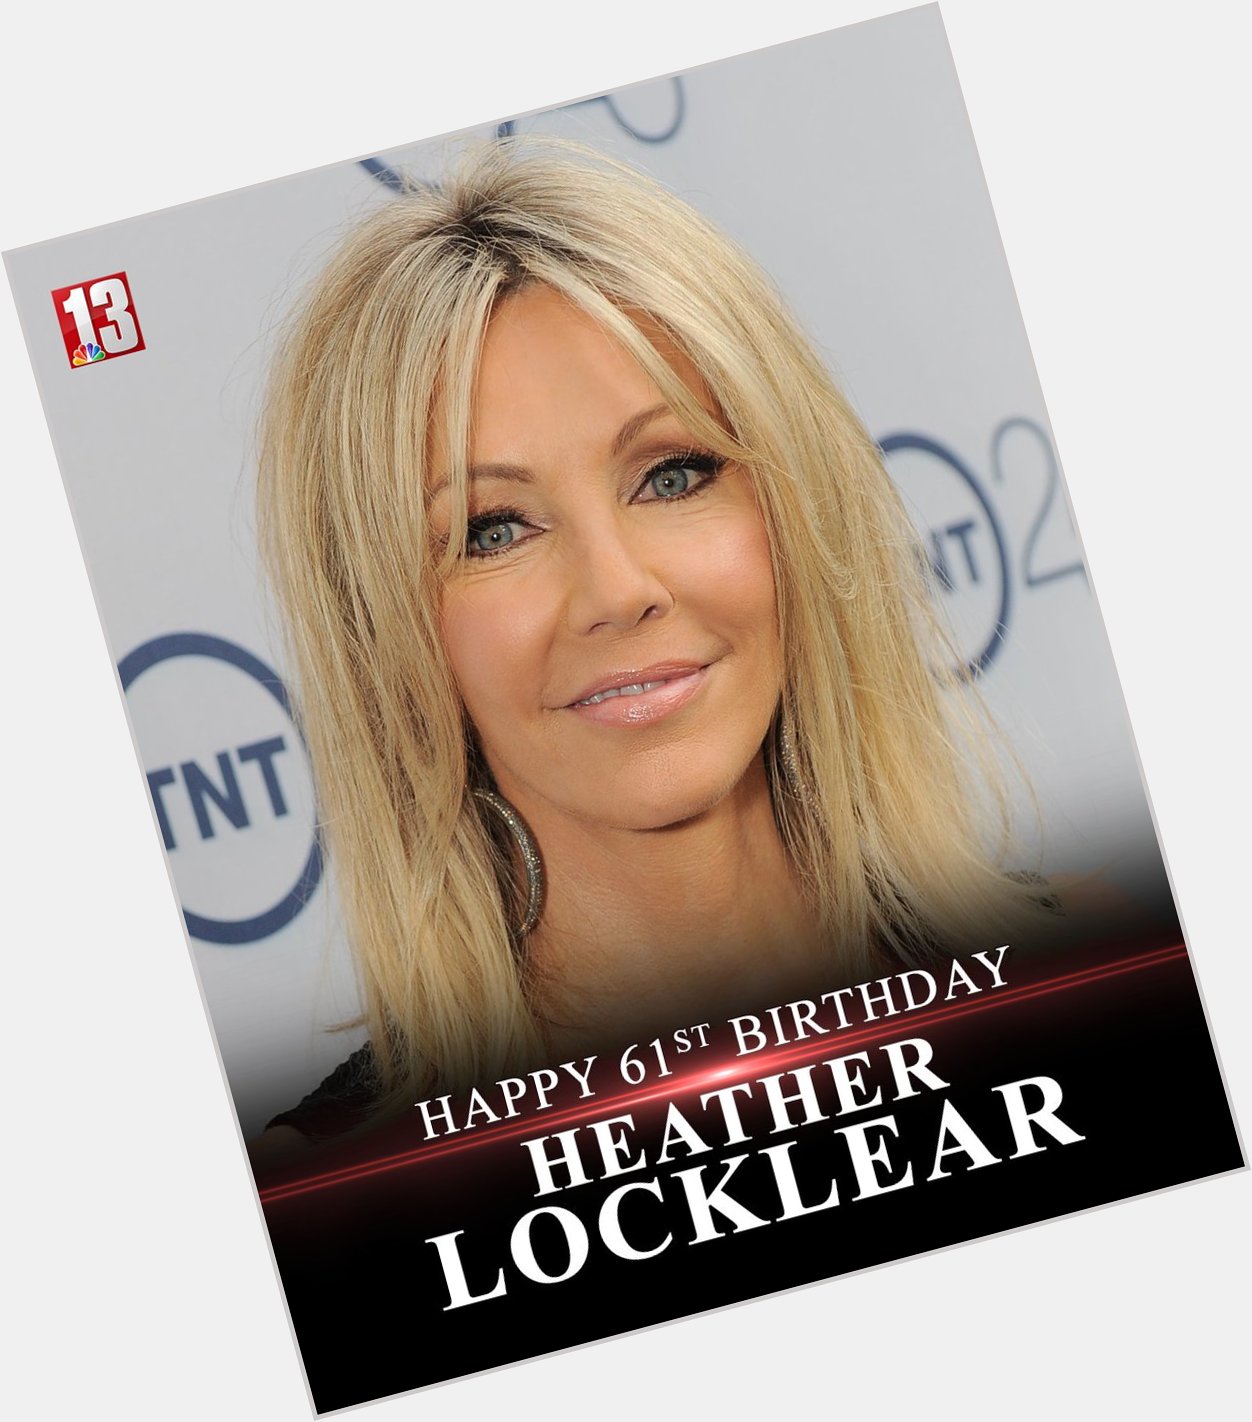   HAPPY 61st BIRTHDAY to actress Heather Locklear! What\s your favorite role she\s had? 